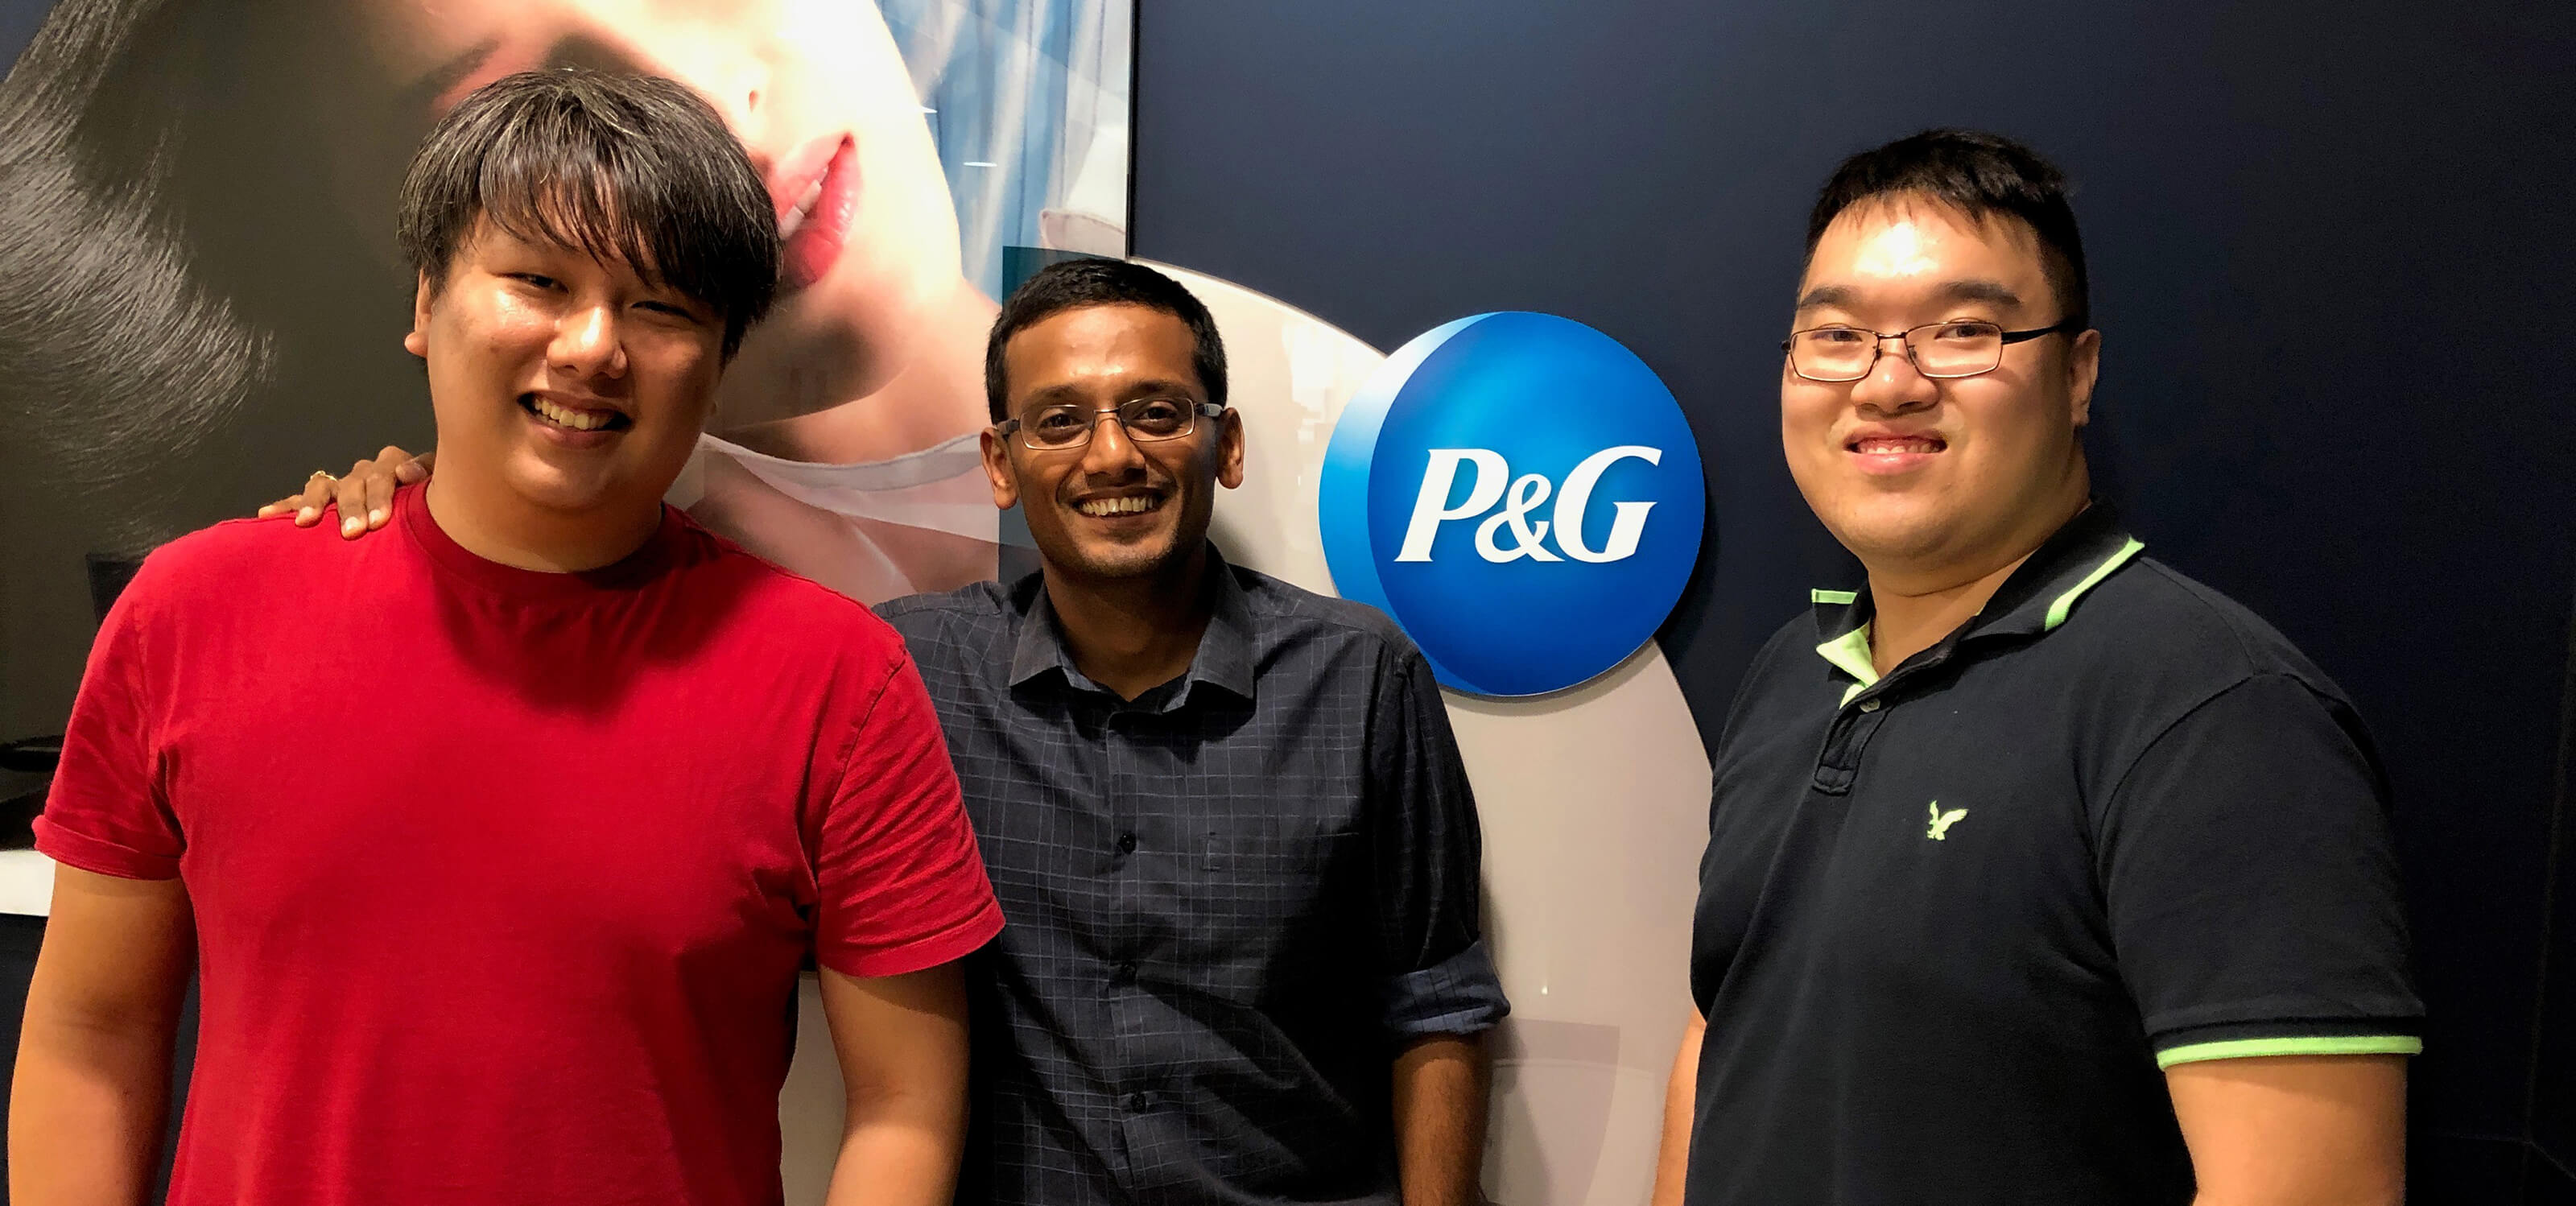 Two SIT-DigiPen (Singapore) graduates stand in front of the Procter &amp; Gamble company logo